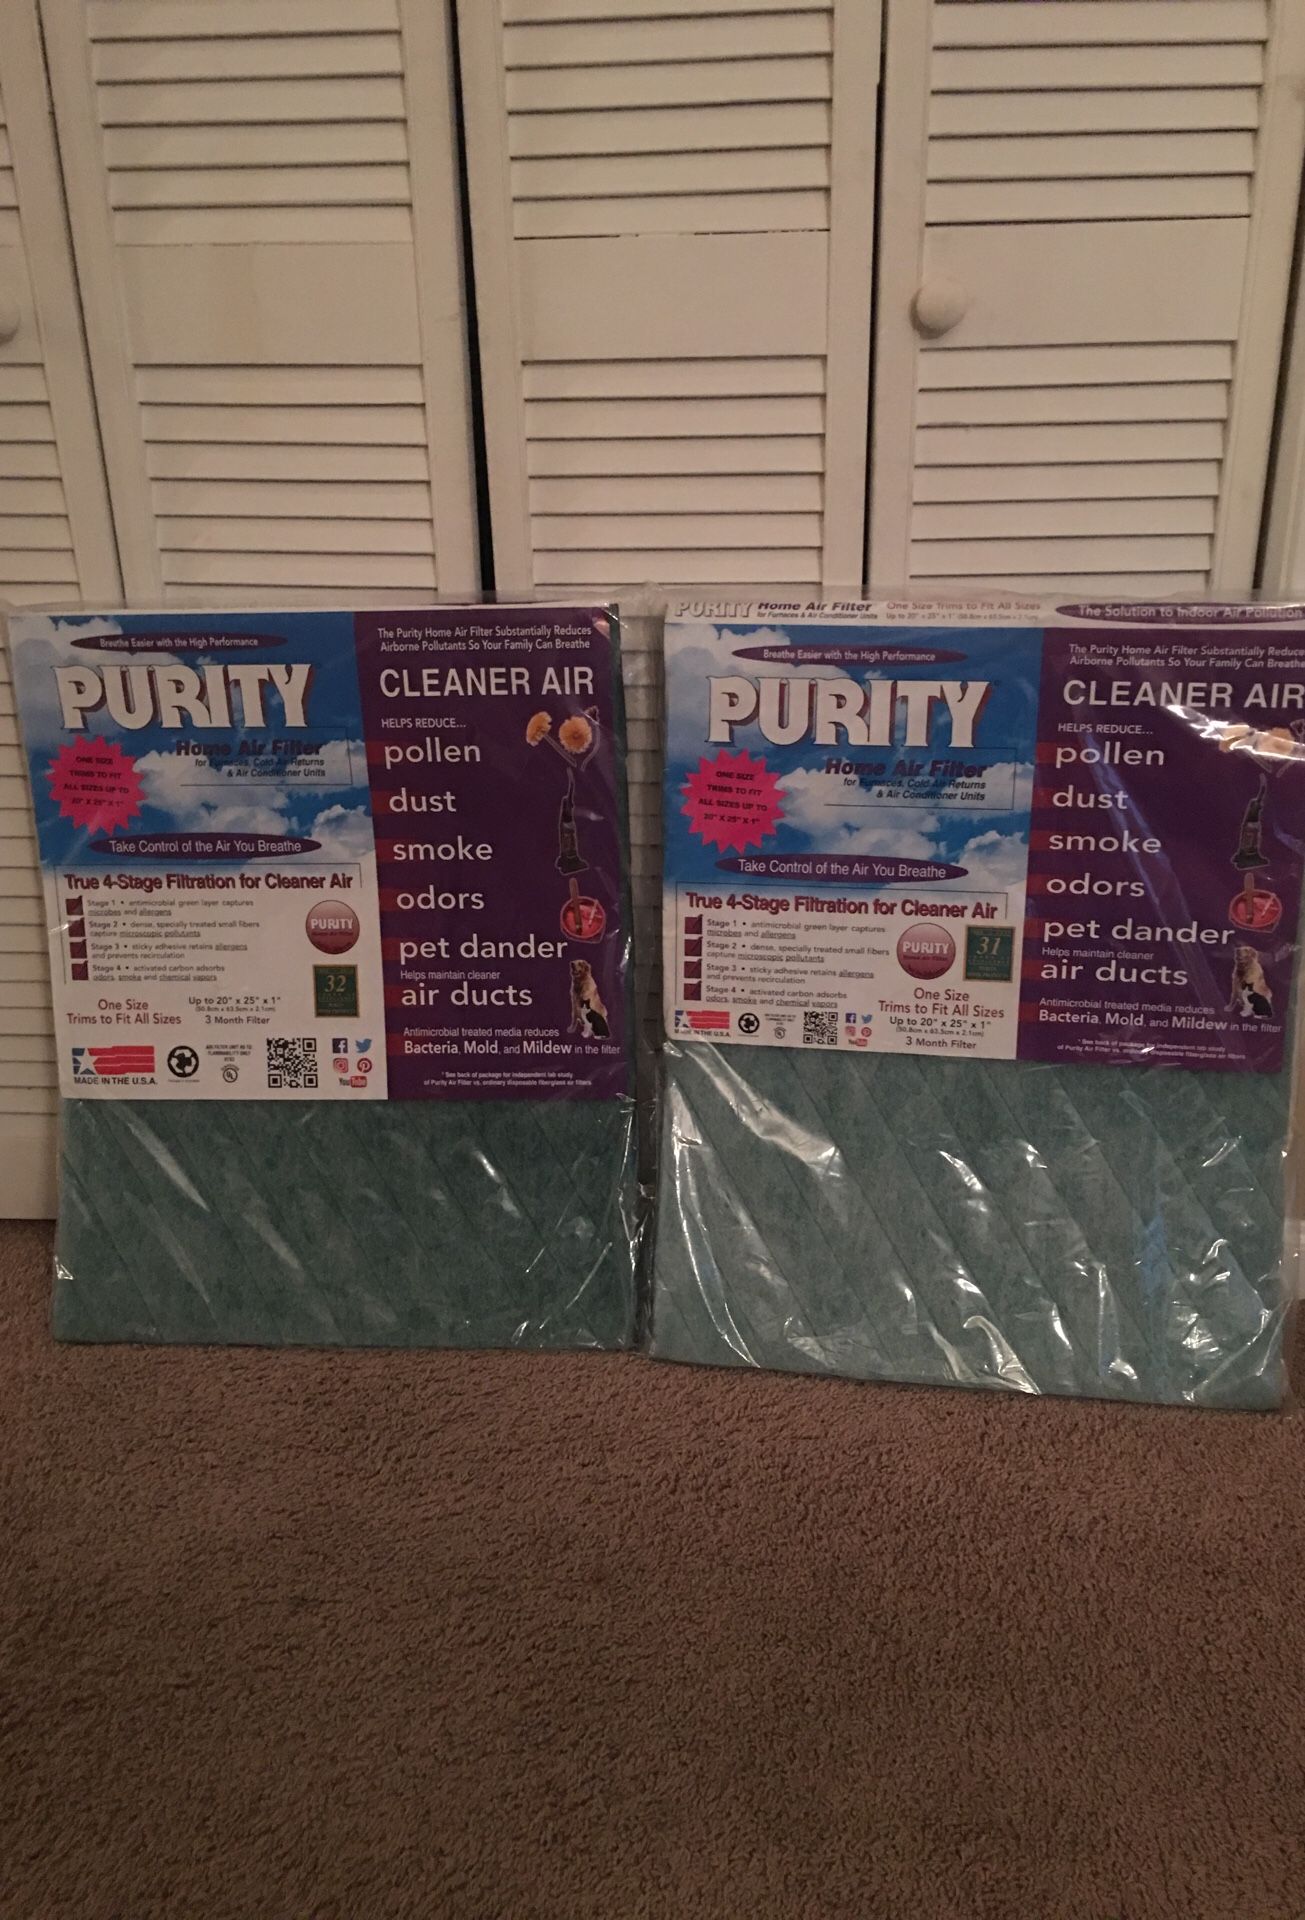 PURITY Home Air Filter (2)